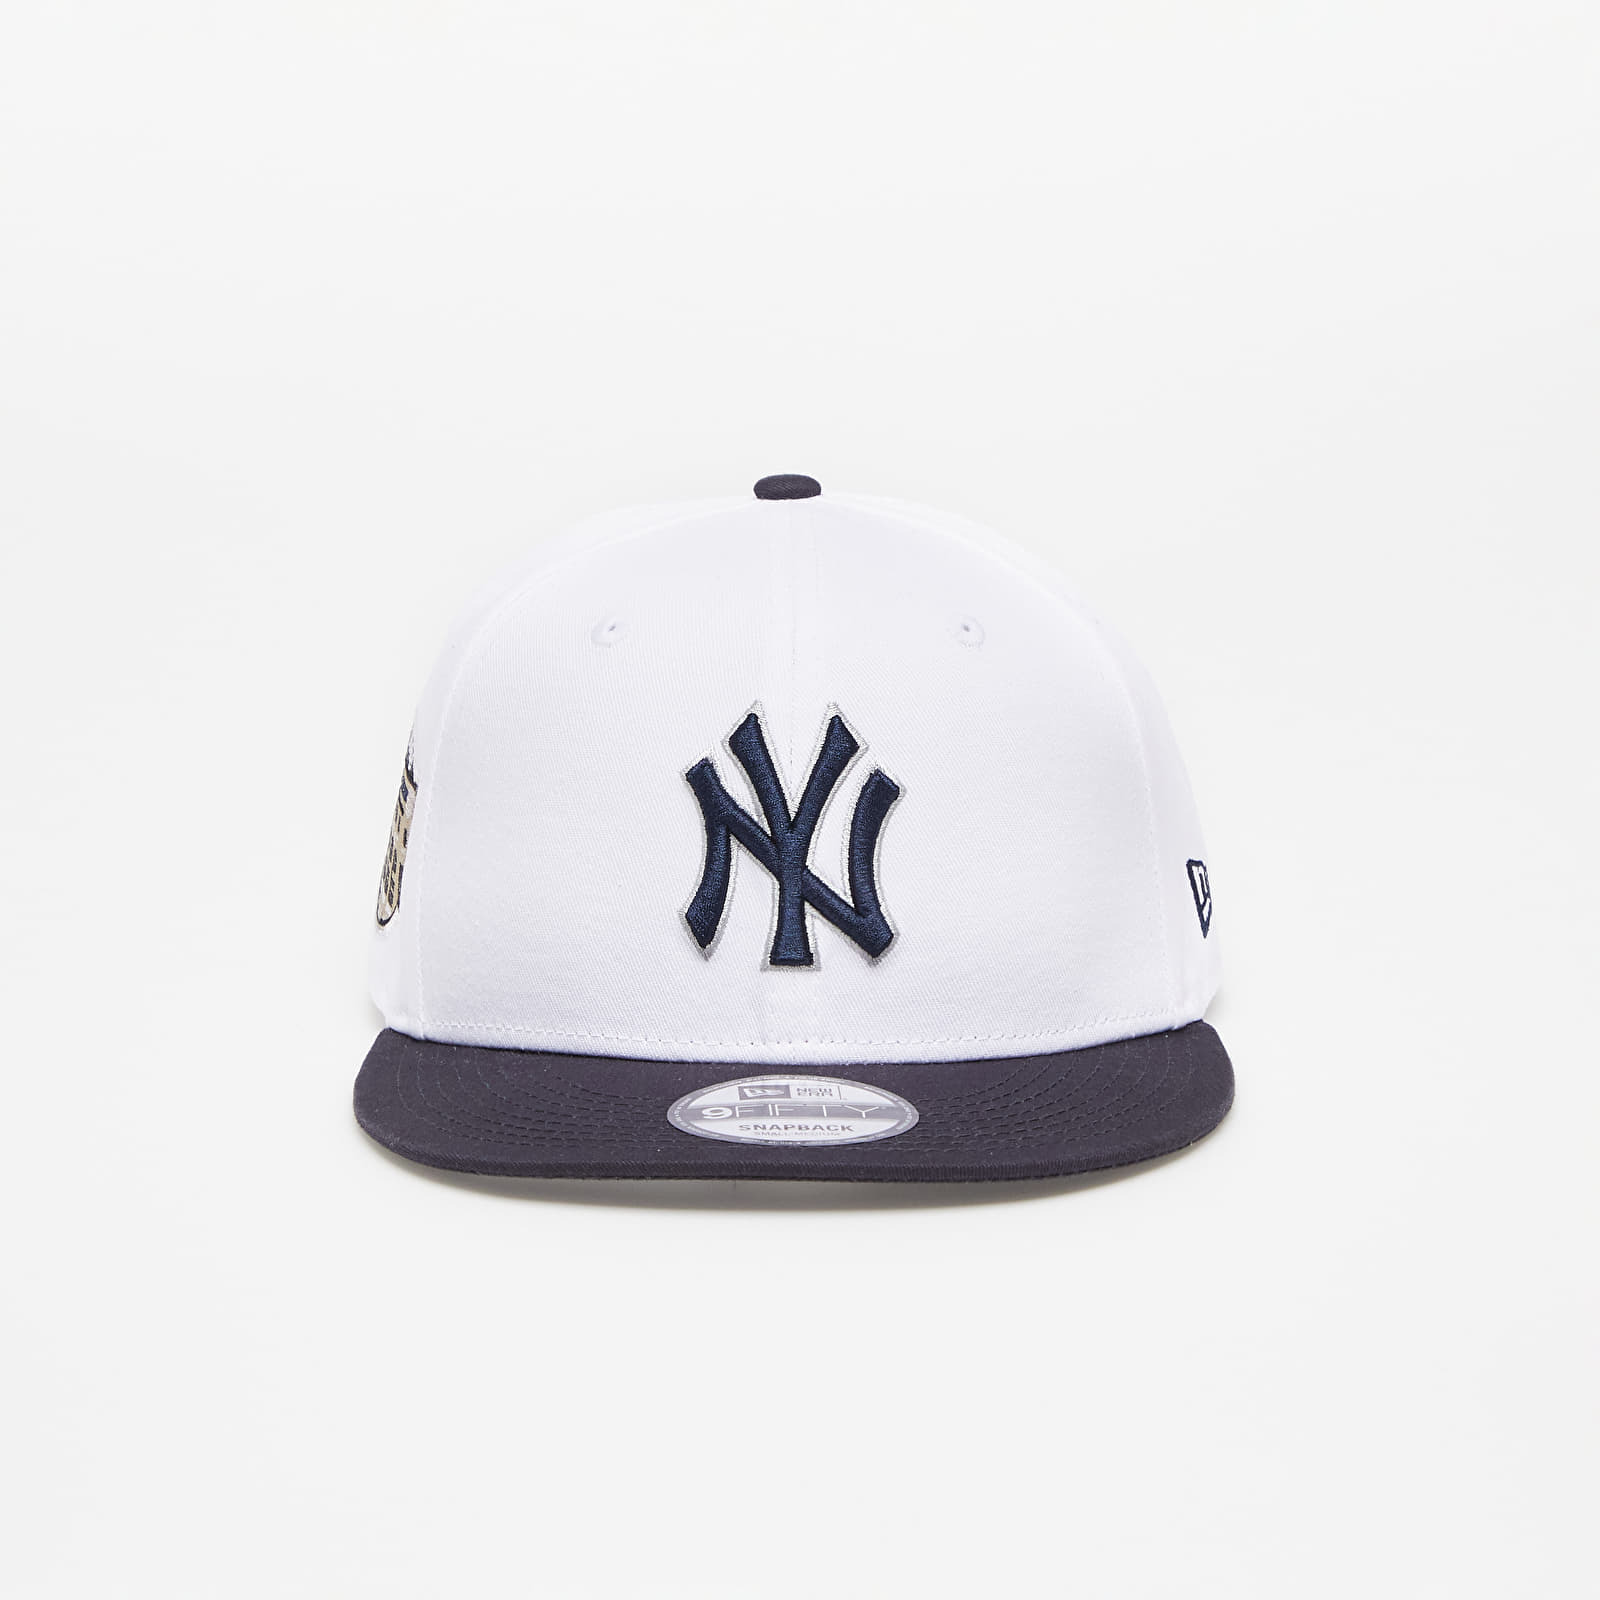 Levně New Era New York Yankees Crown Patches 9FIFTY Snapback Cap White/ Navy